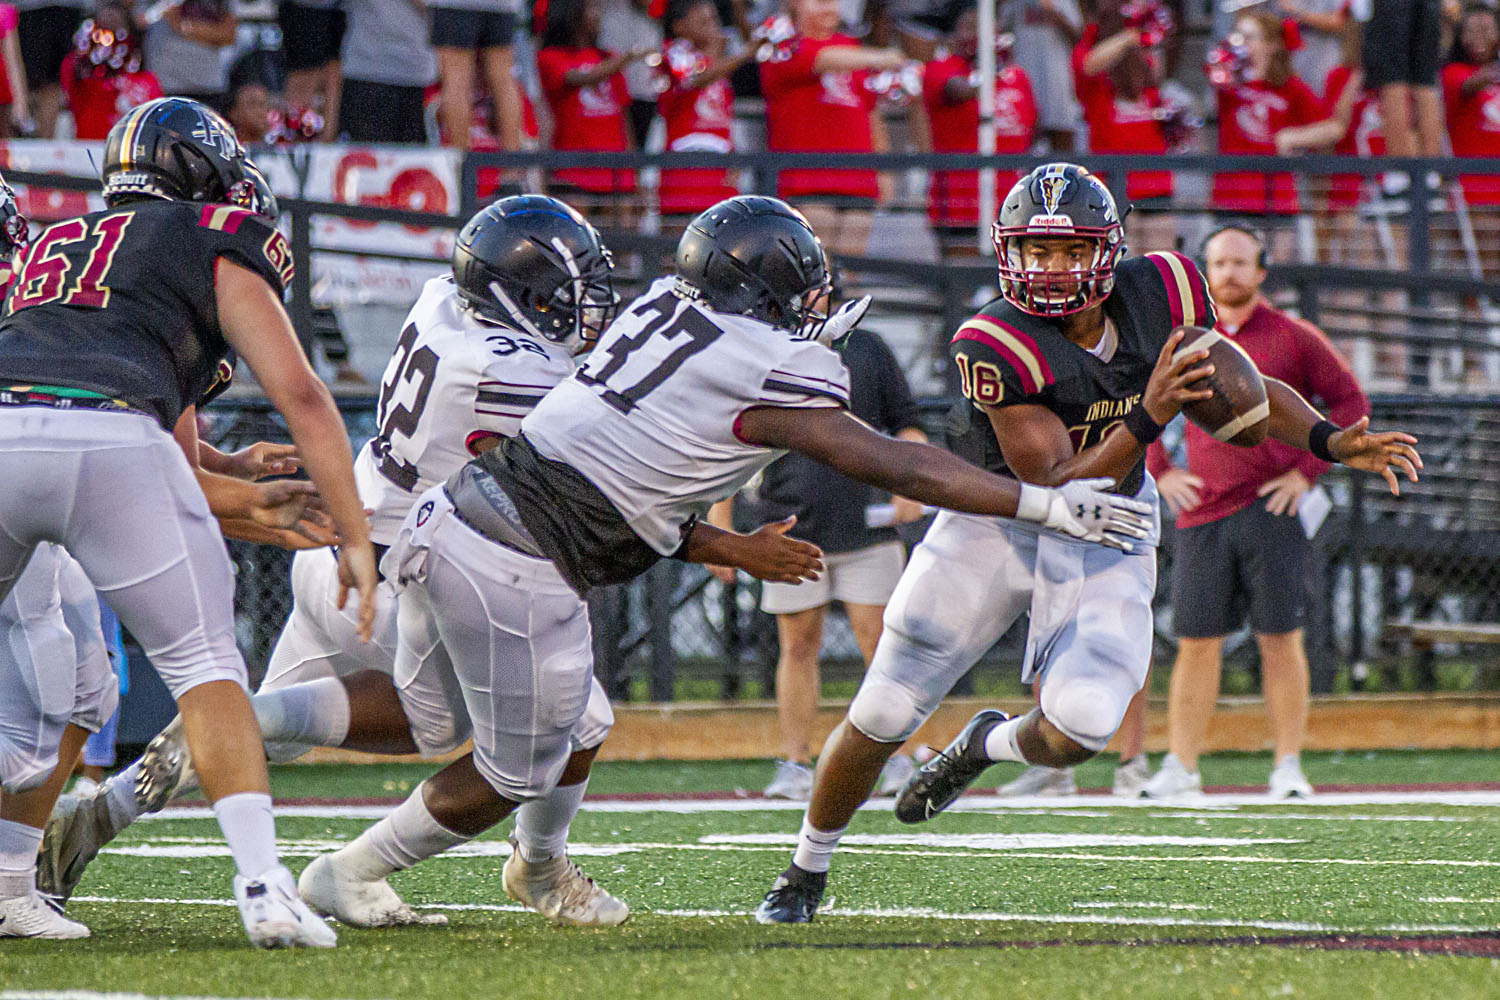 Pinson Valley relies on defense, arm of White to defeat Shades Valley, 23-7